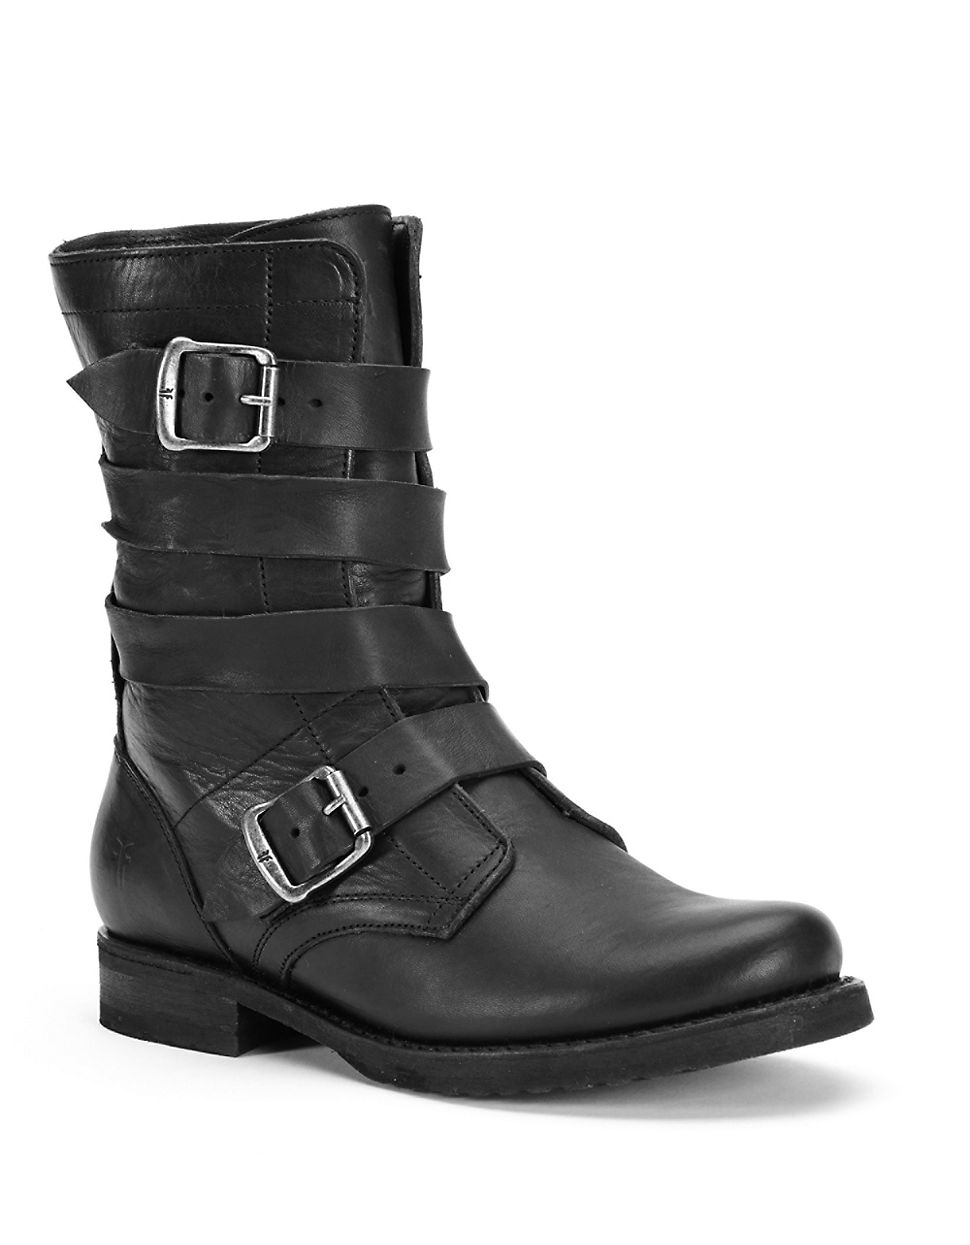 Frye Veronica Tanker Mid-calf Leather Boots in Black | Lyst